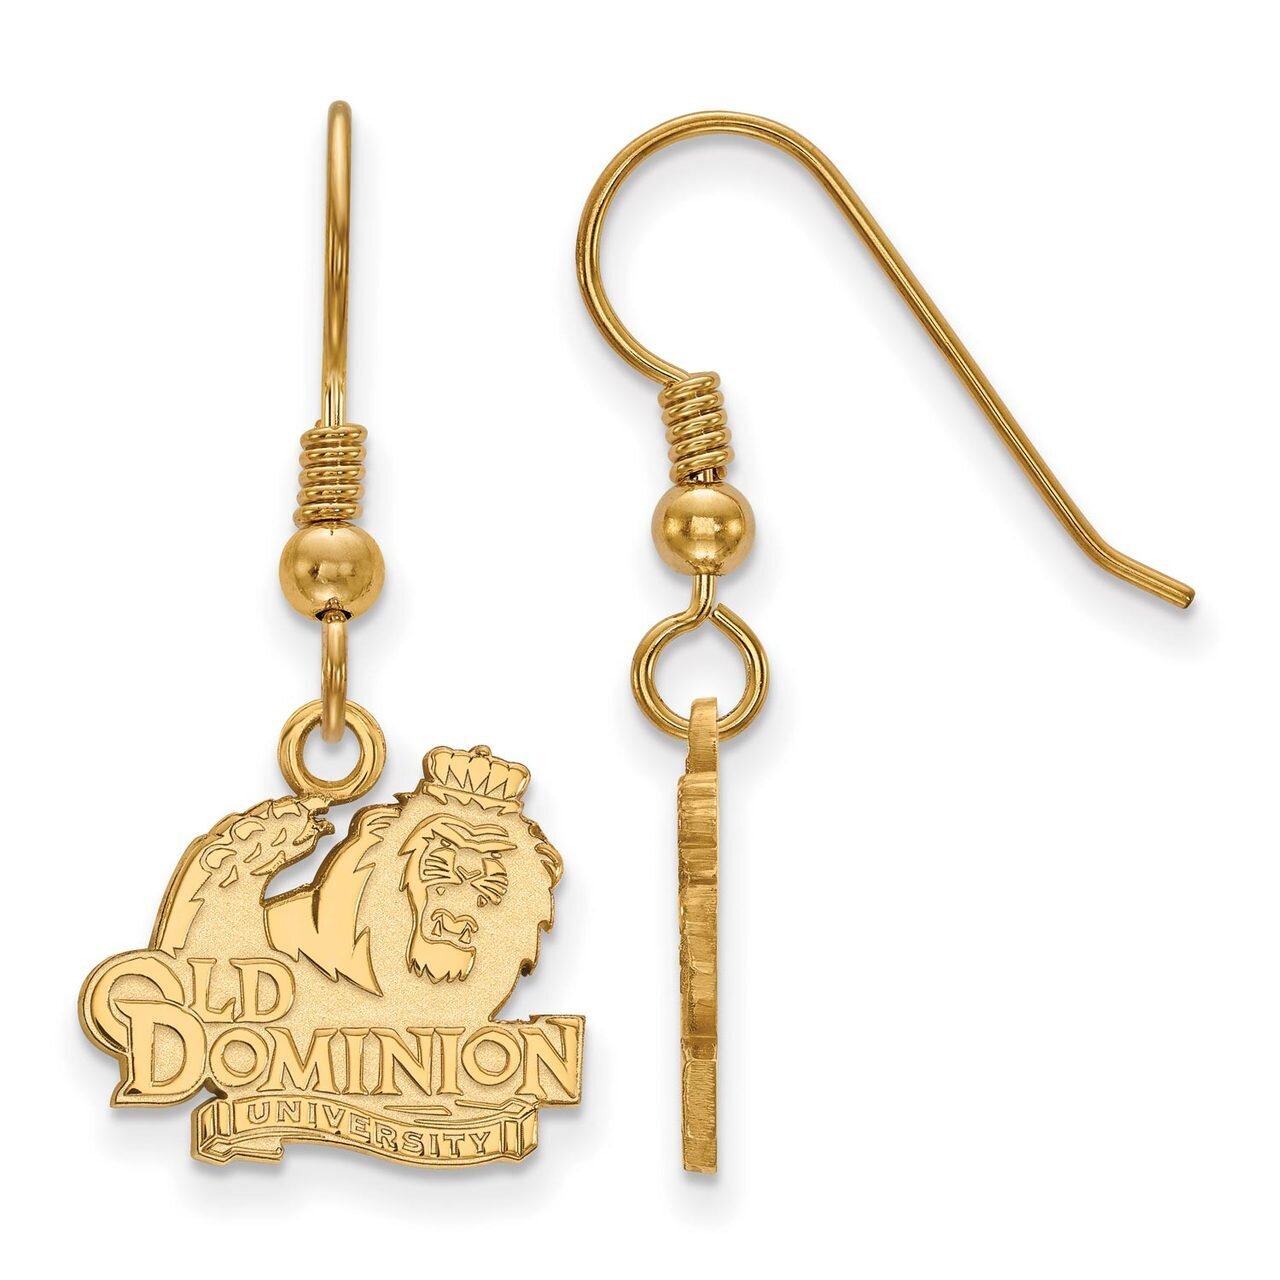 Old Dominion University Small Dangle Earring Wire Gold-plated Silver GP006ODU